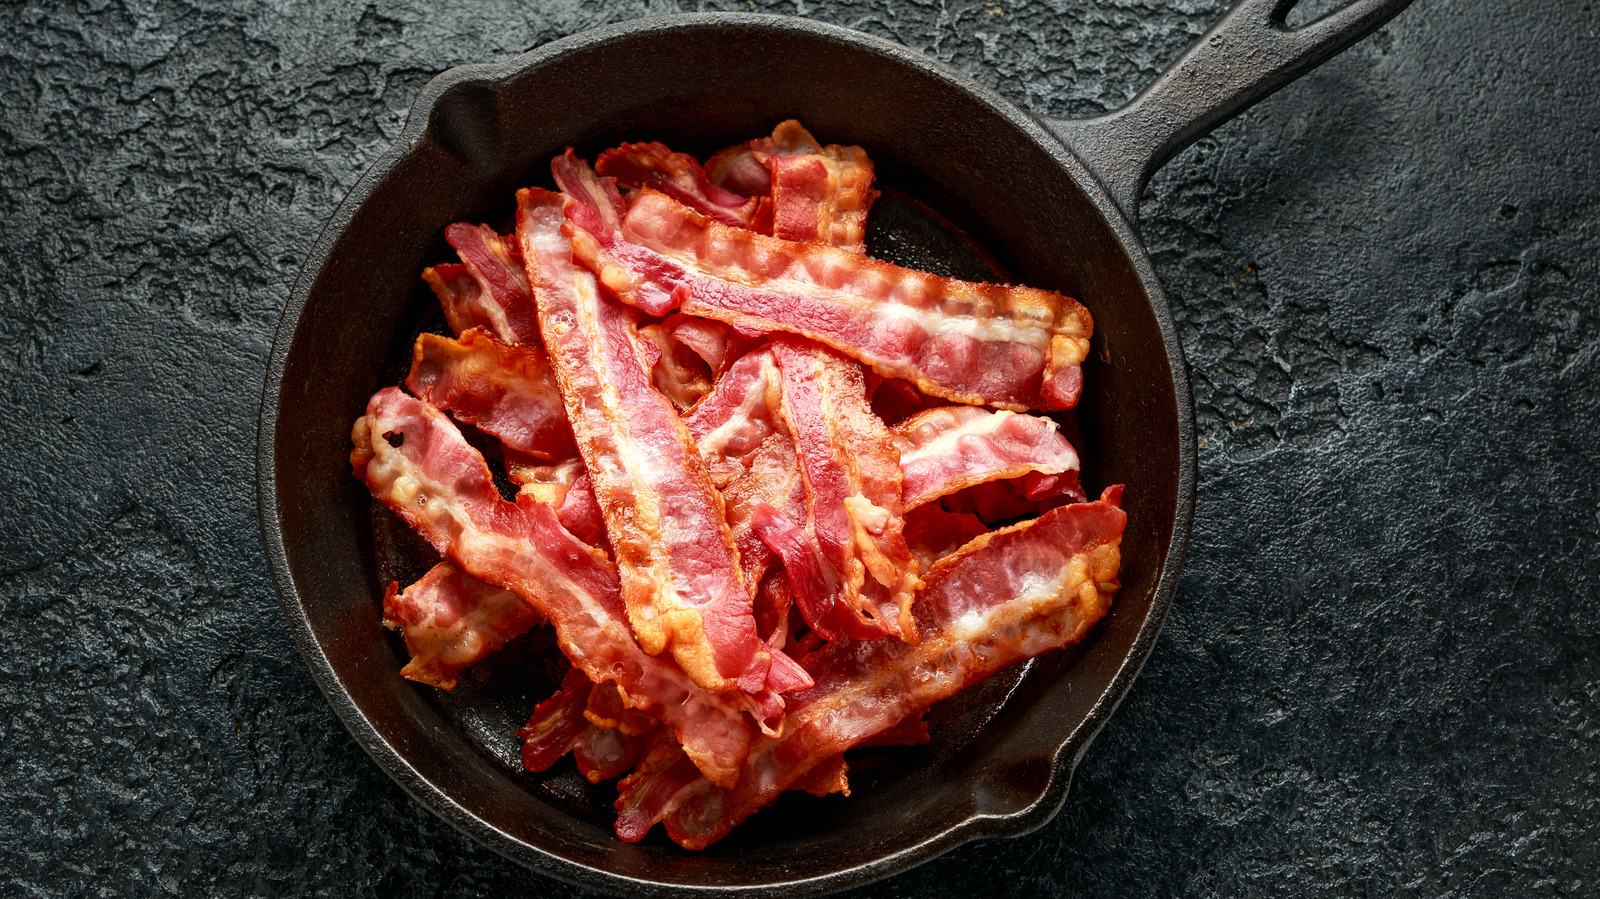 Why You Should Never Use A Hot Pan To Cook Bacon